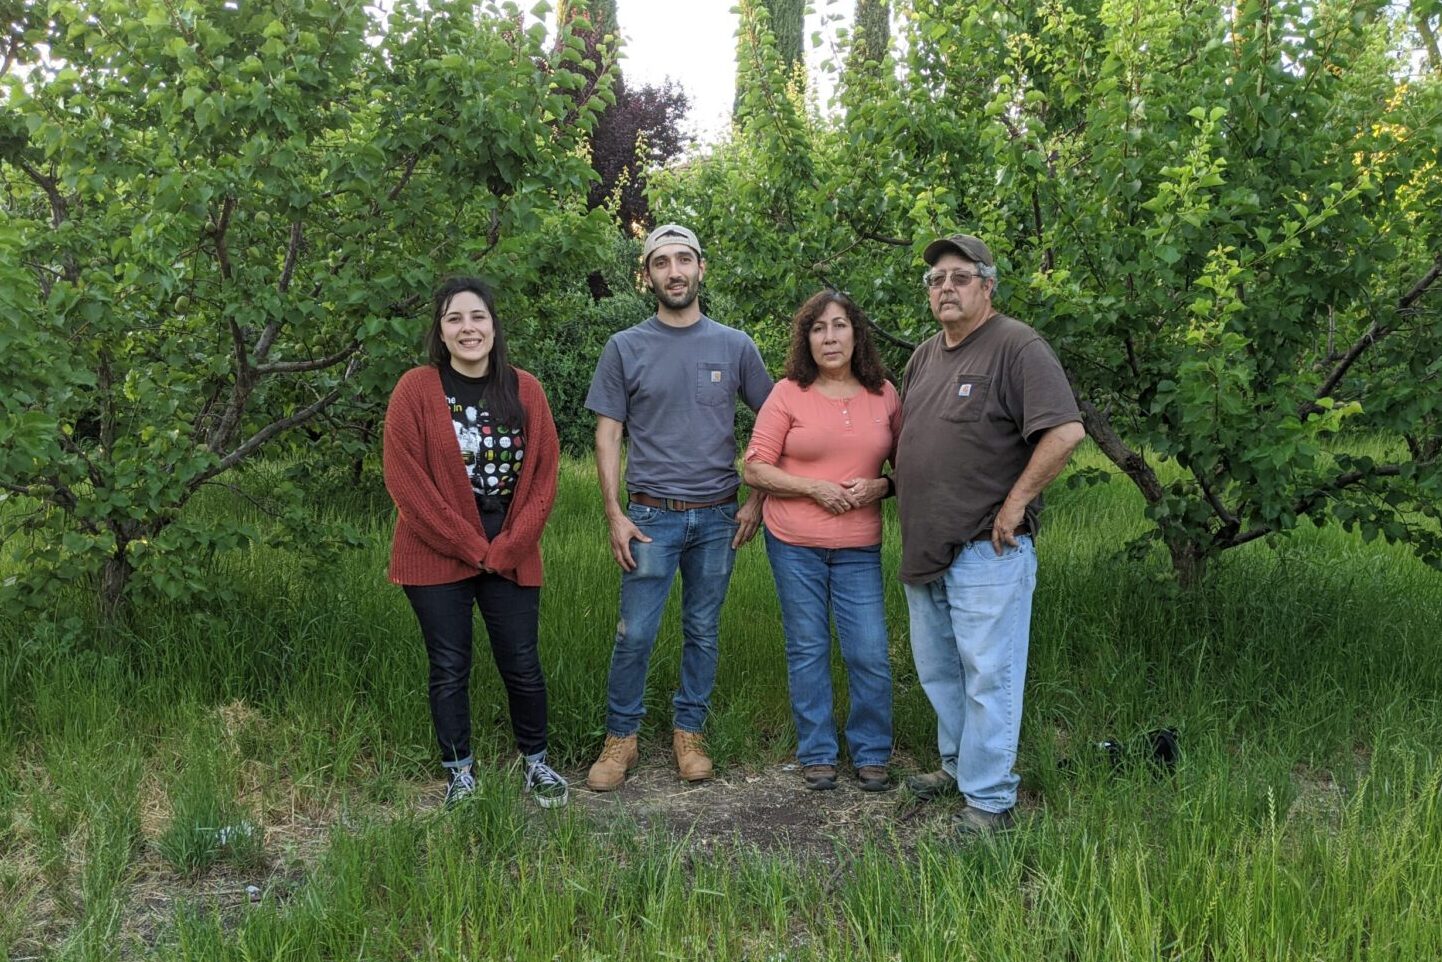 Winters Fruit Tree family photo. The Carter family poses in front of lush green trees.